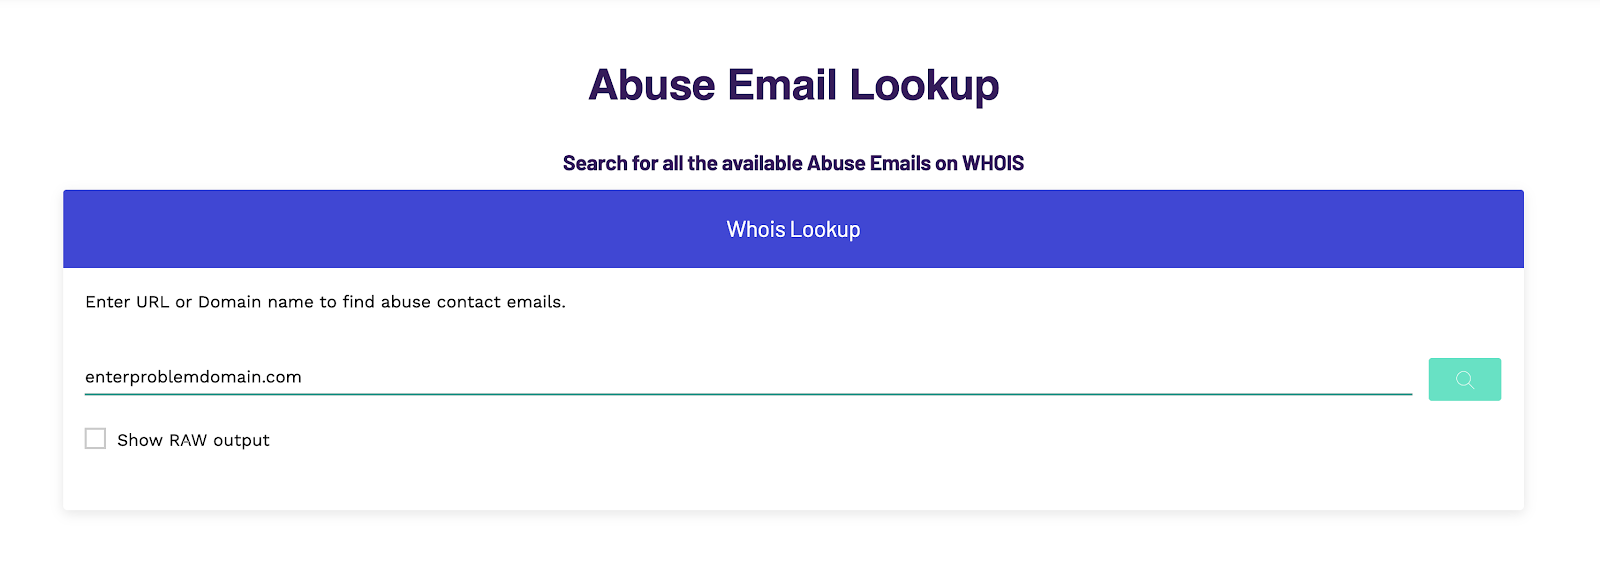 abuse email lookup